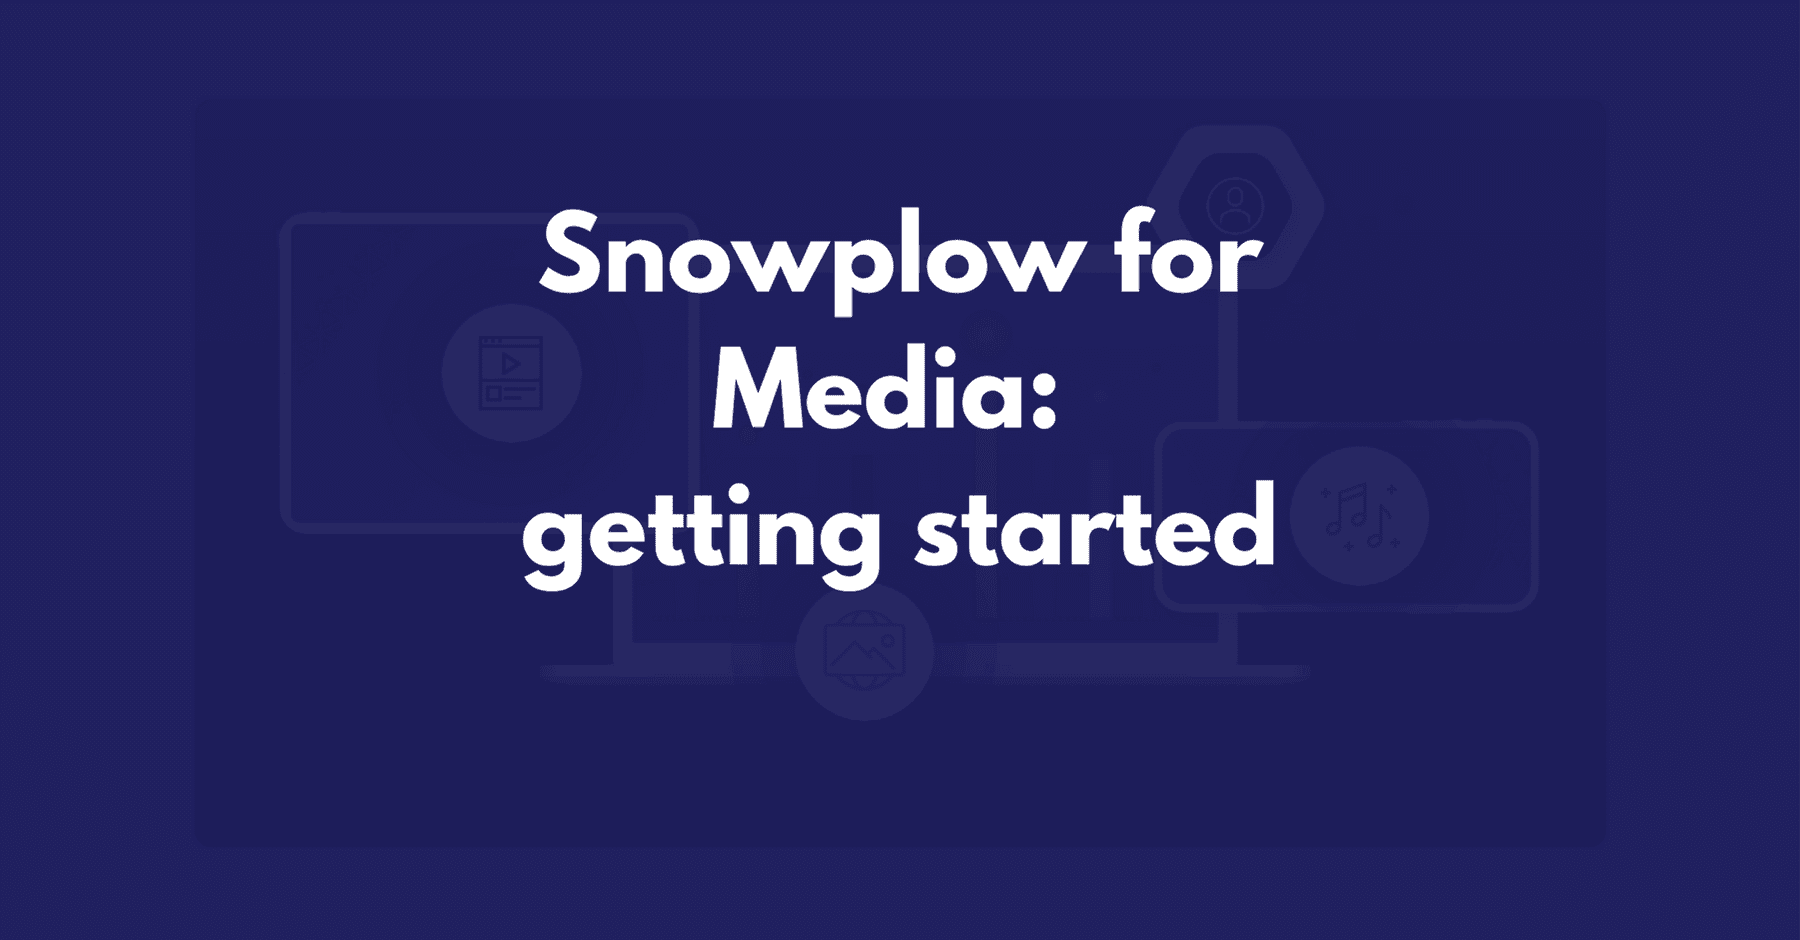 Snowplow for media part 3: what can we do with the data when we're getting started?